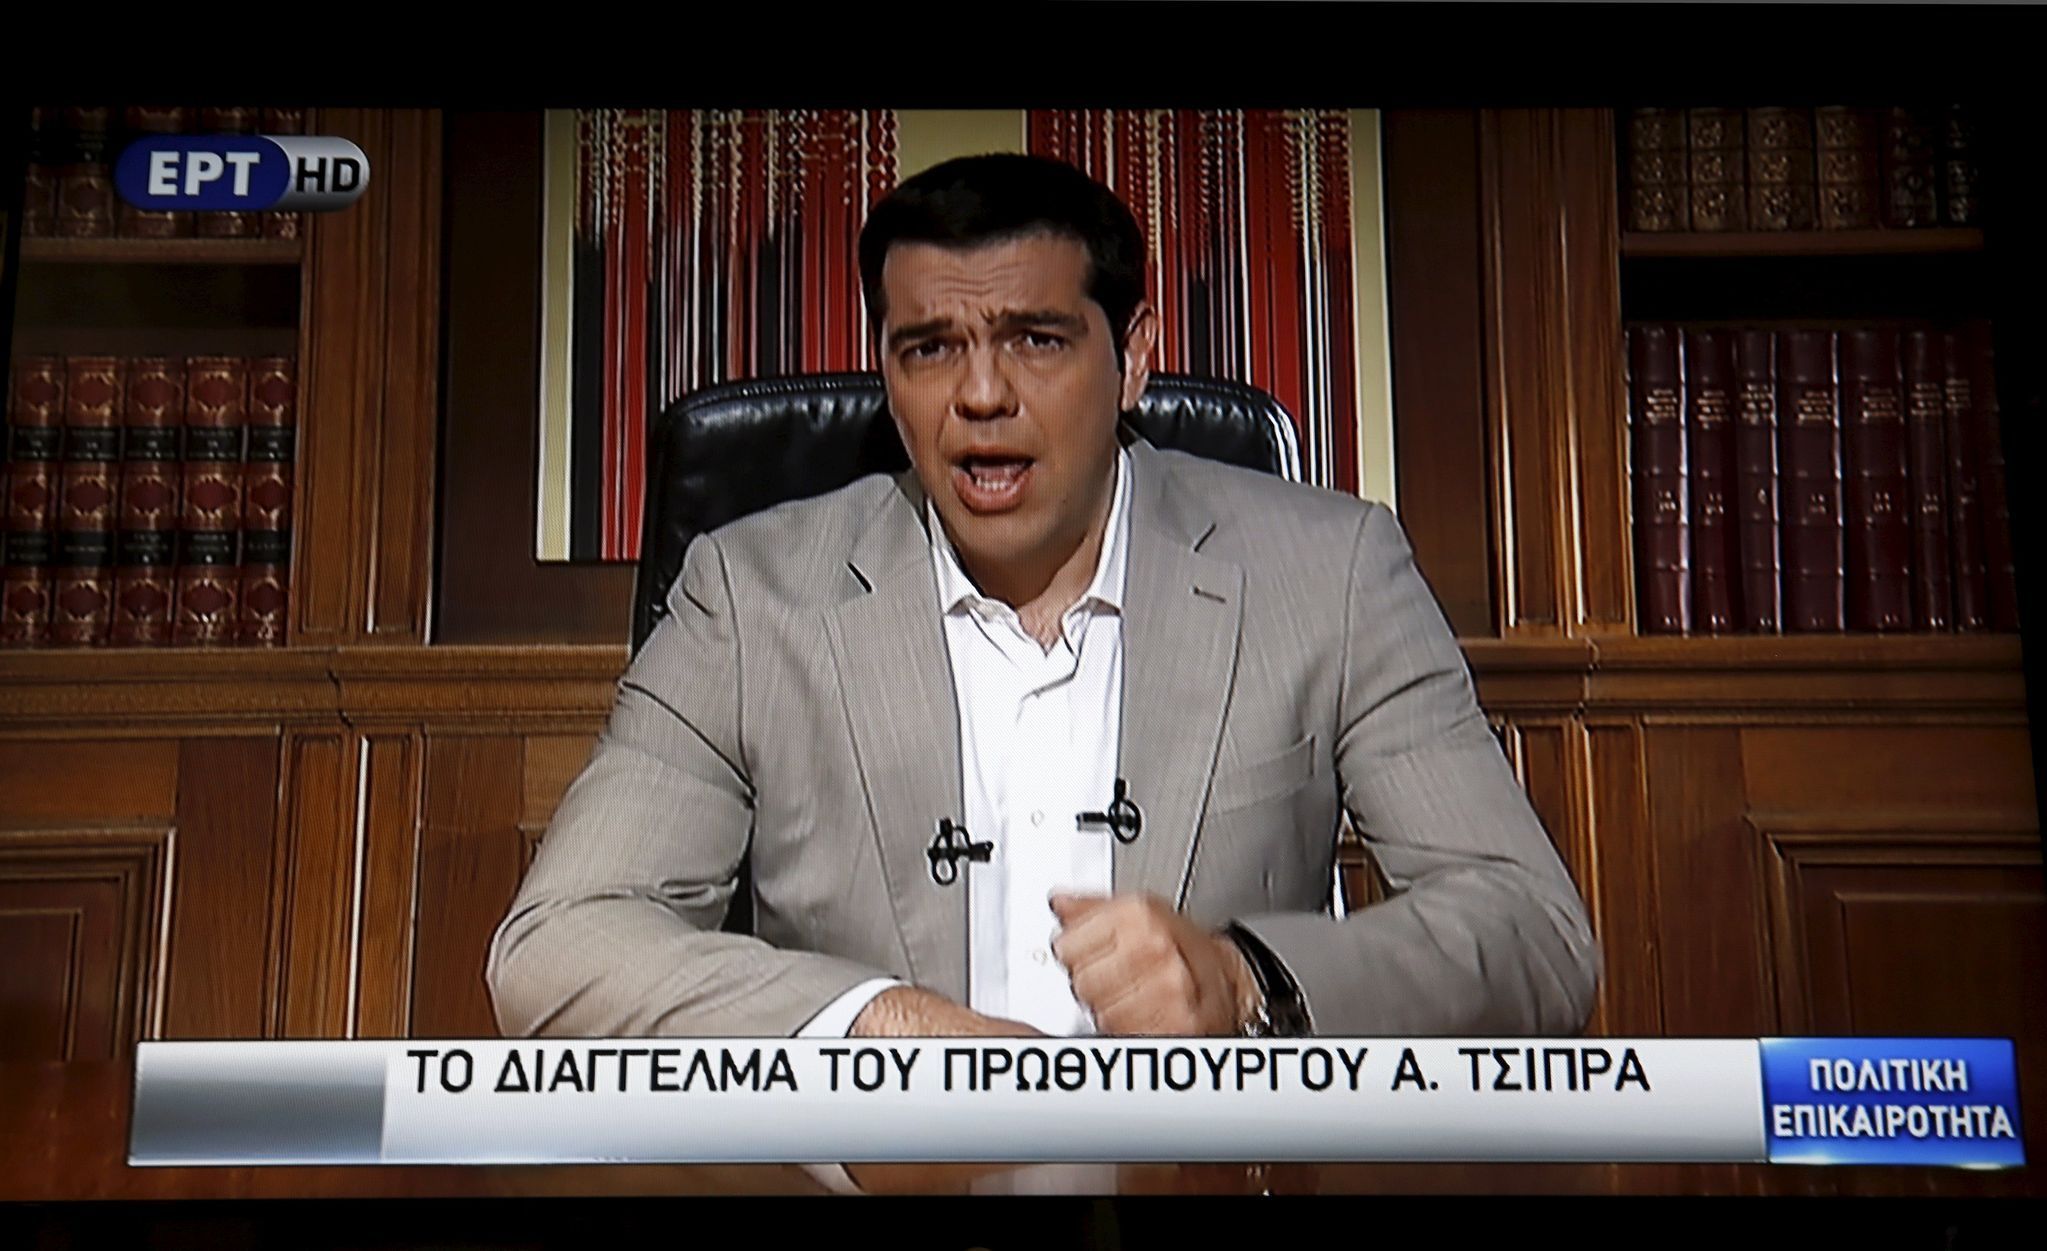 Greek Prime Minister Alexis Tsipras is seen on a television monitor while addressing the nation in Athens, Greece